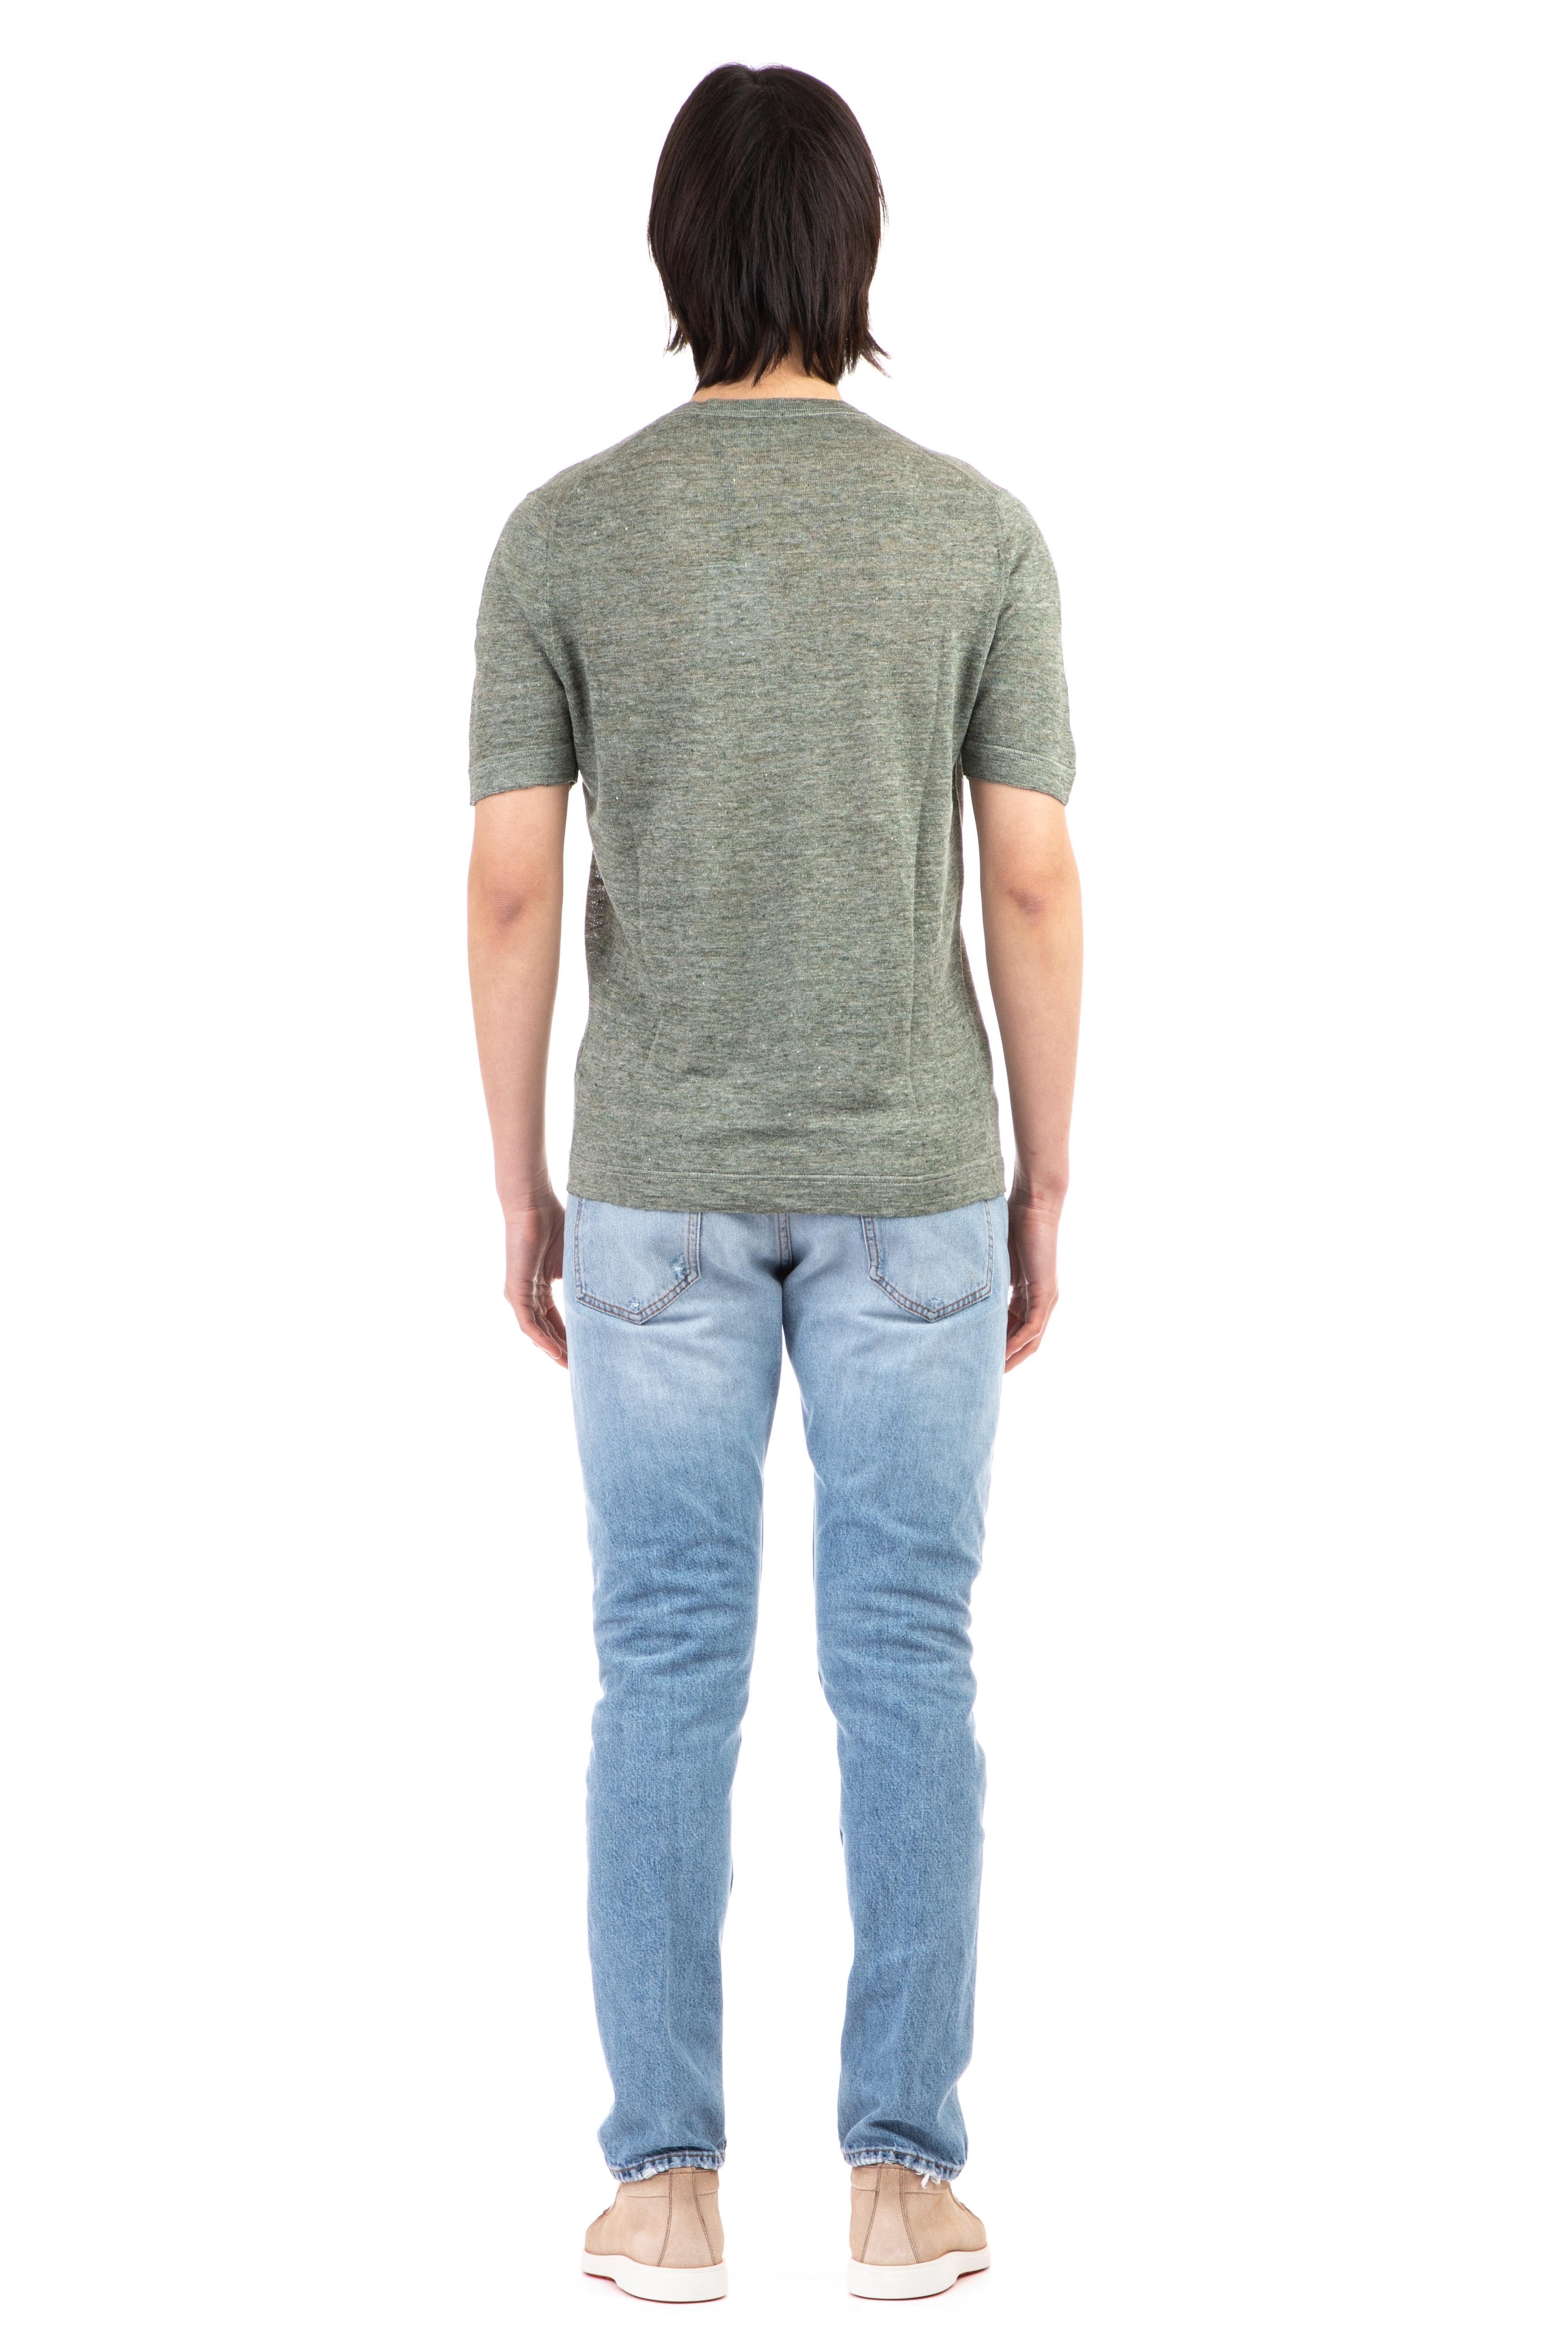 Linen T-shirt with double stitching collar